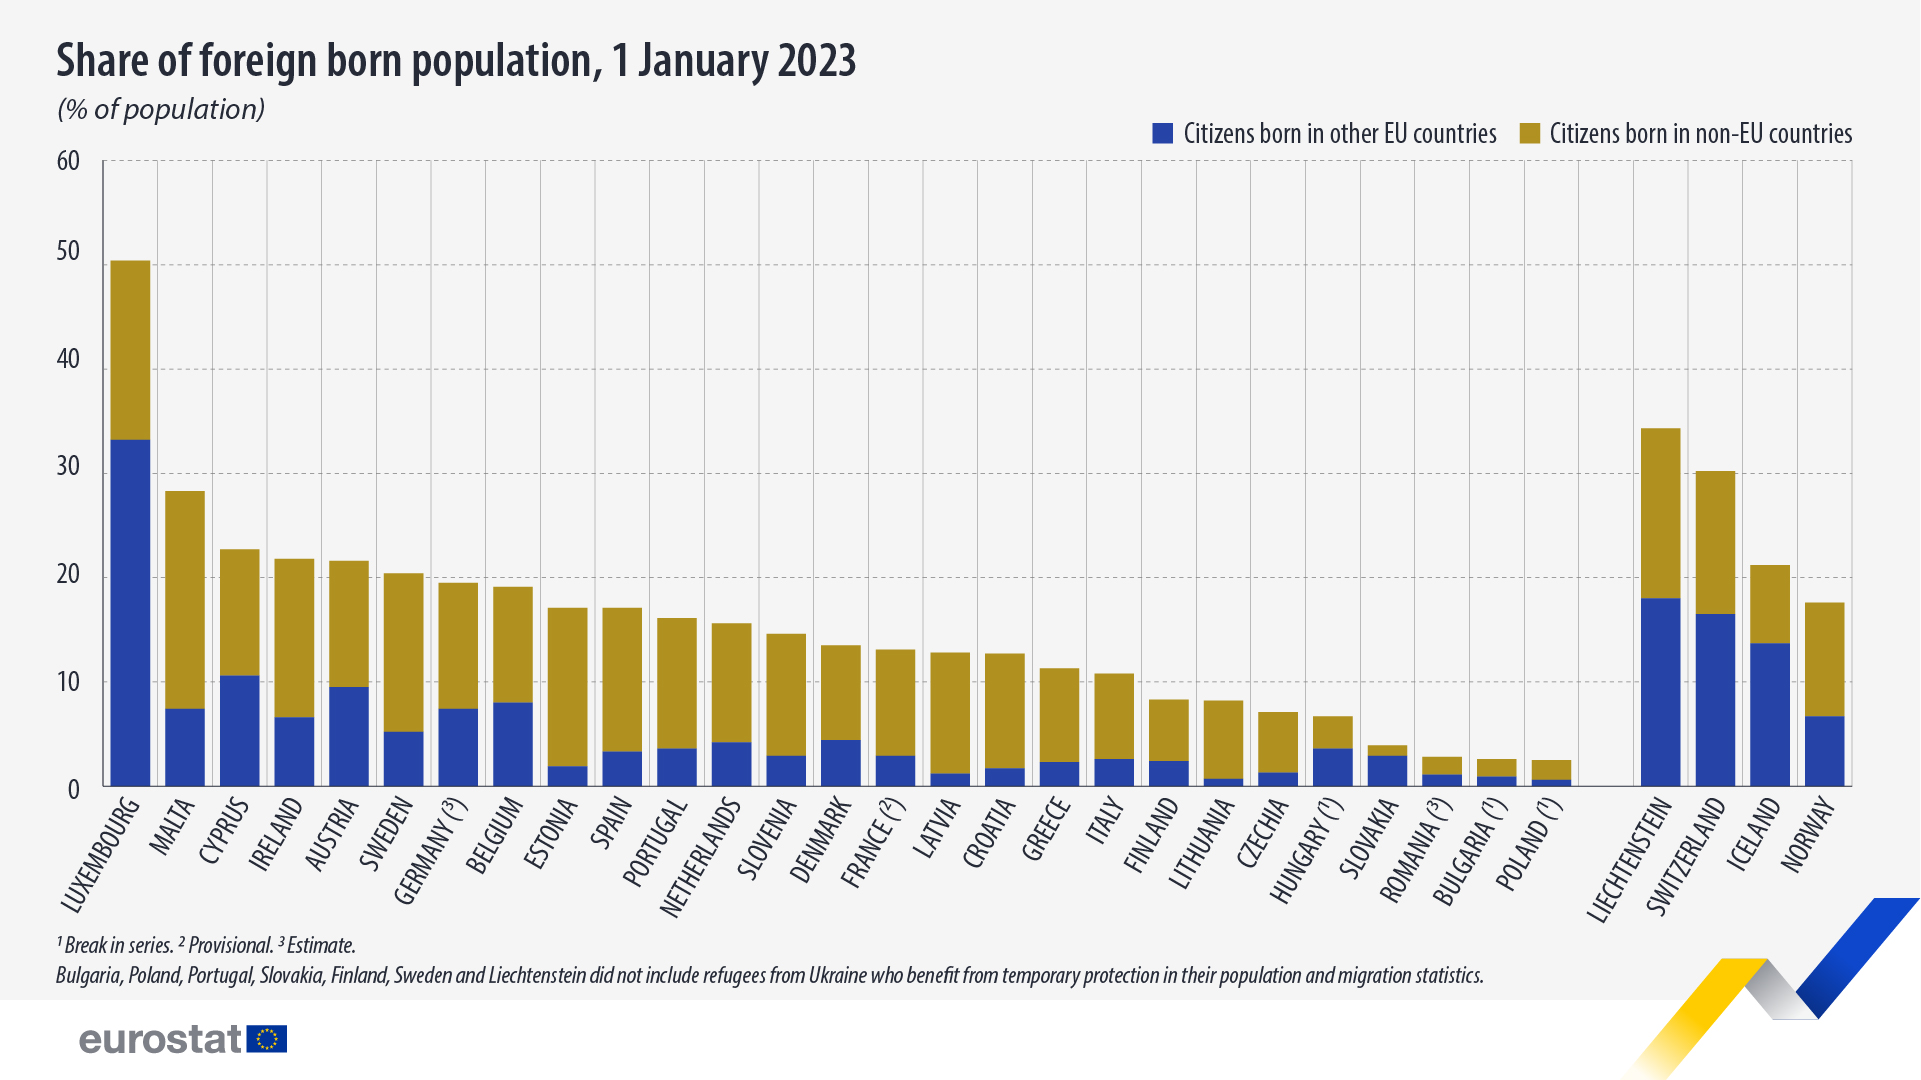 Share of foreign born population, 1 January 2023, % of population. Chart. See link to full dataset below.